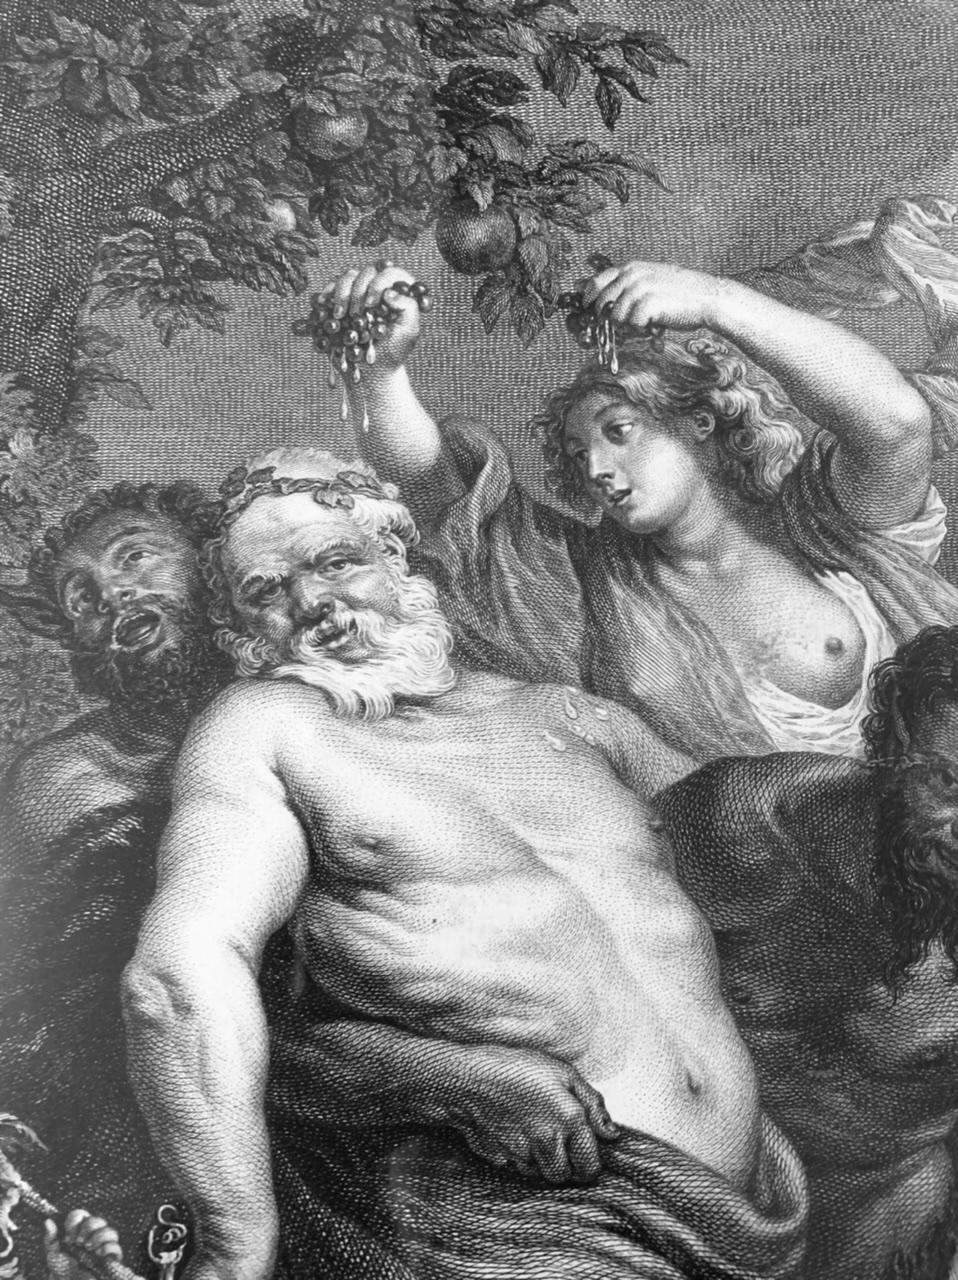 Beautiful engraving made by Nicolas de Launay after the work of Peter Paul Rubens.This engraving represents a bacchanalian scene featuring Silenus a mythological character. 
In this scene Silenus is in the center, intoxicated by wine. He is held by